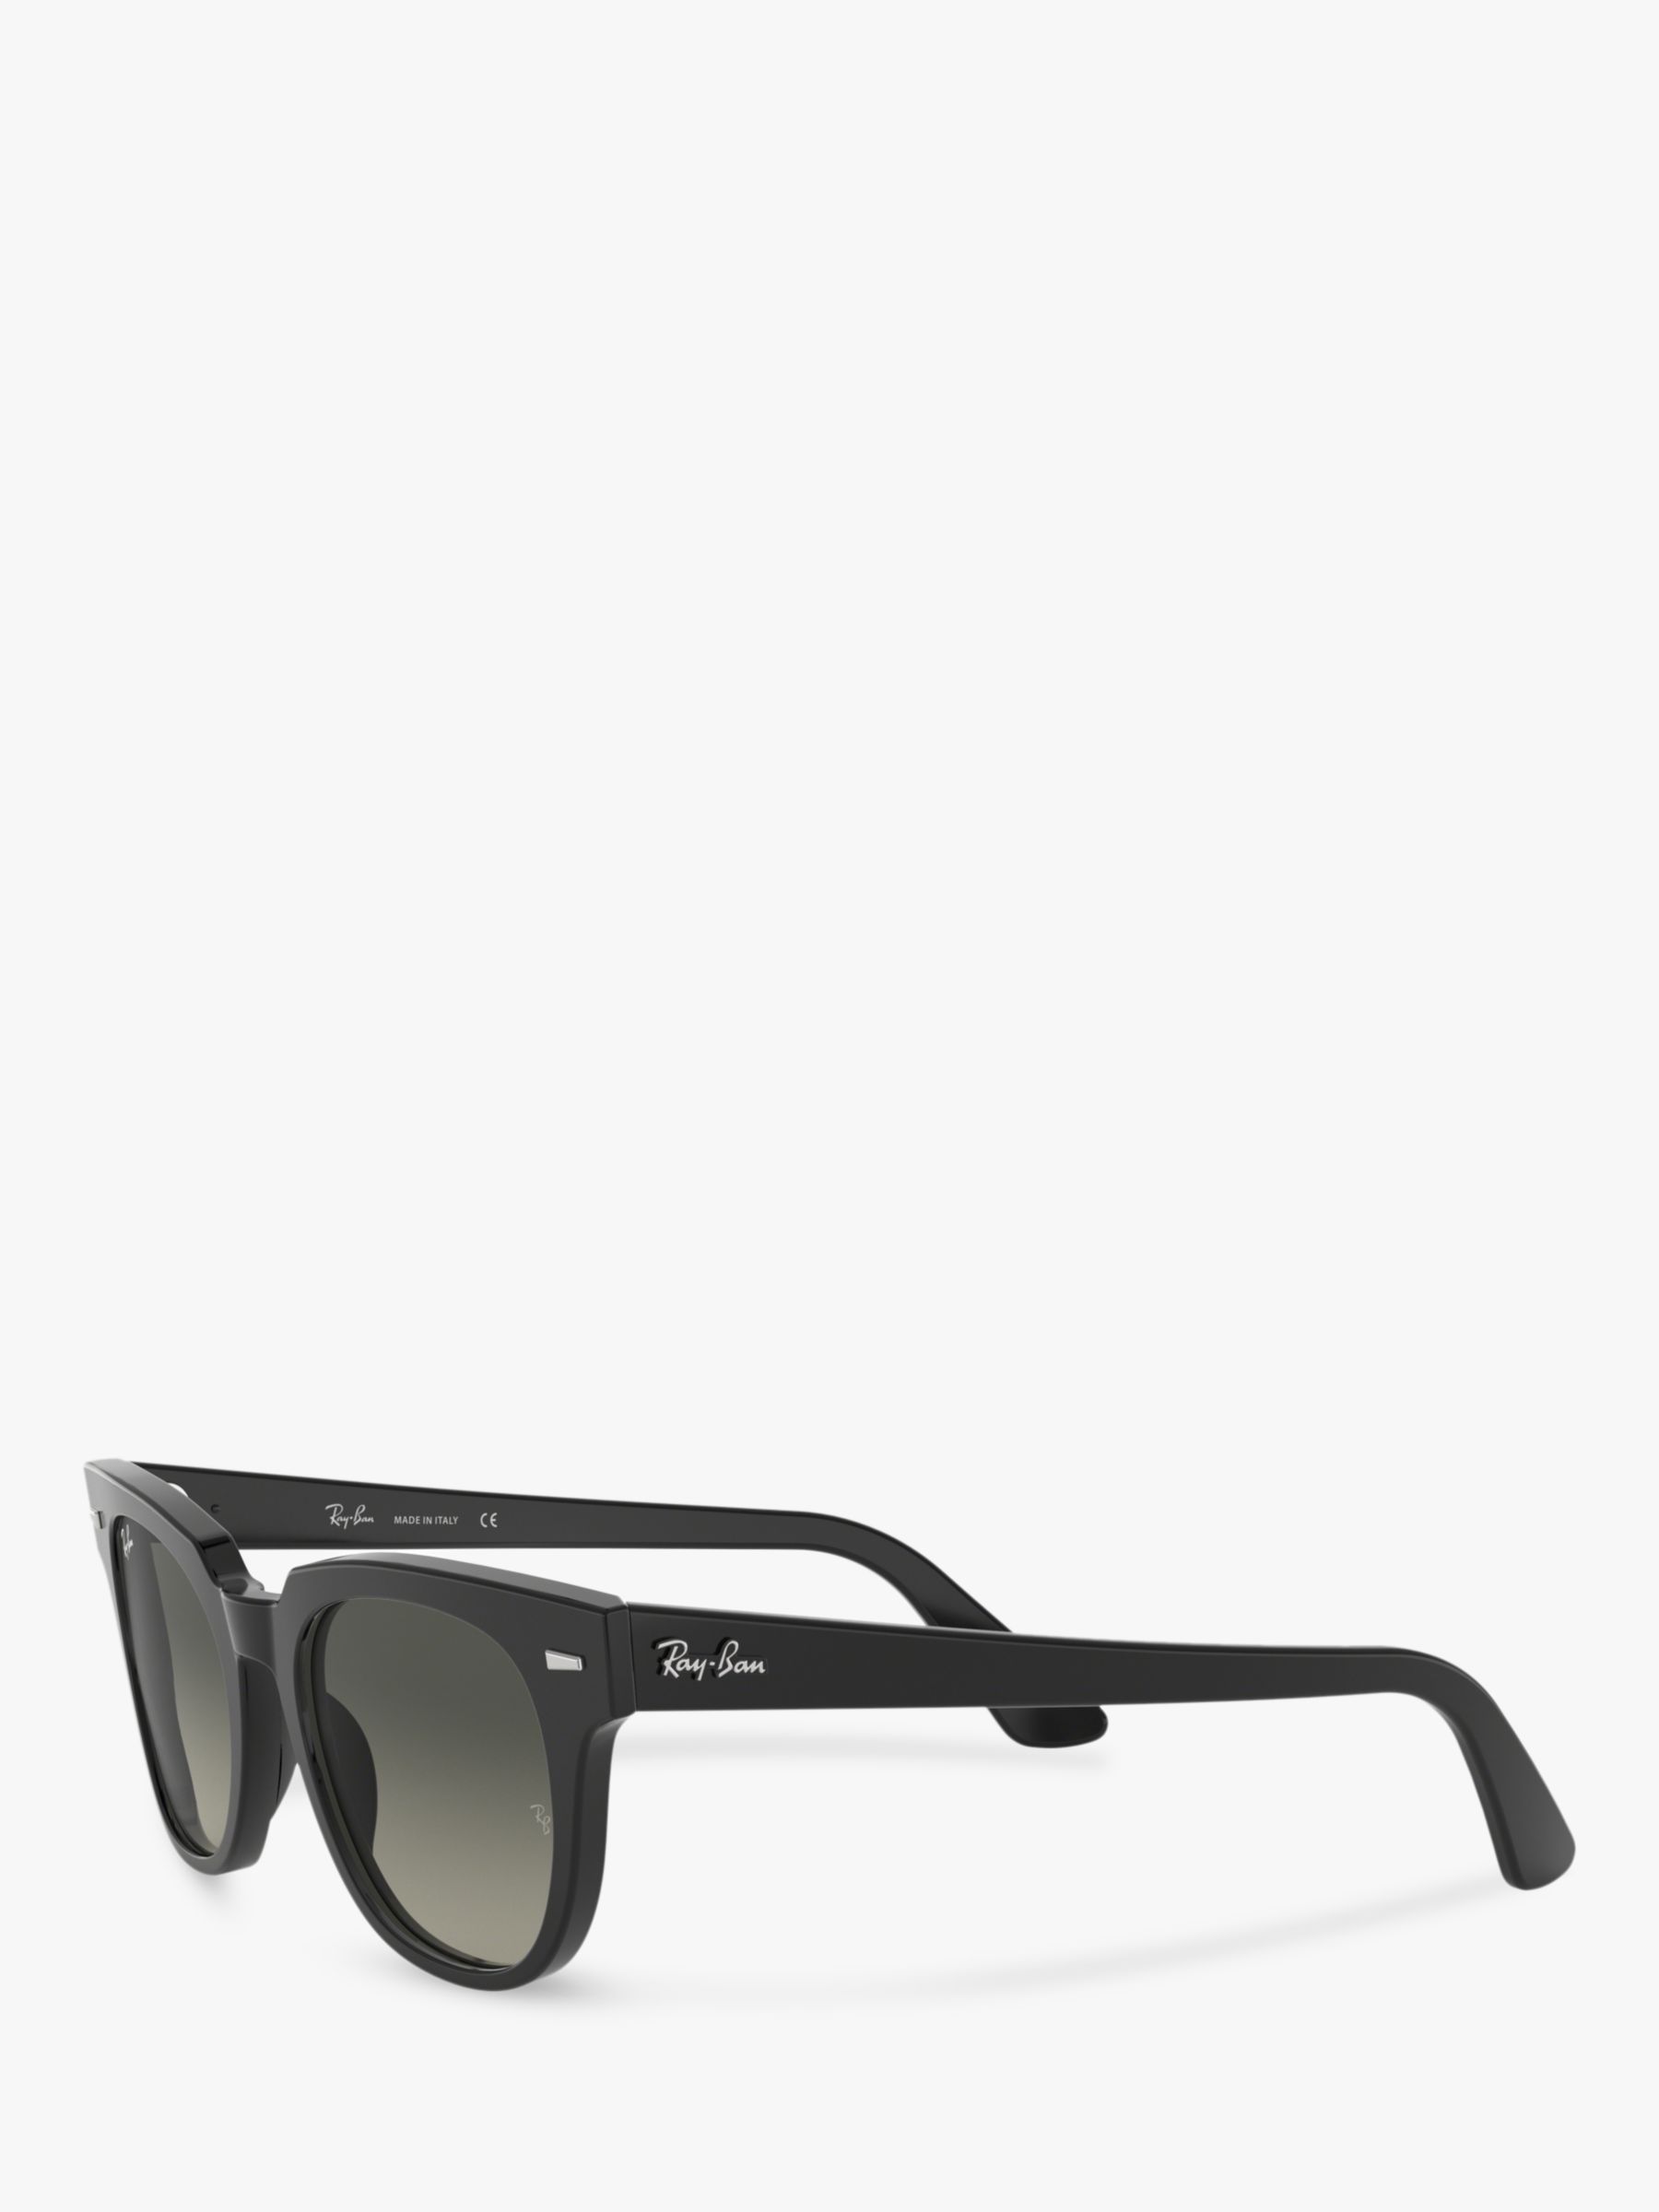 Ray Ban Rb2168 Unisex Square Sunglasses Blackgrey Gradient At John Lewis And Partners 6552